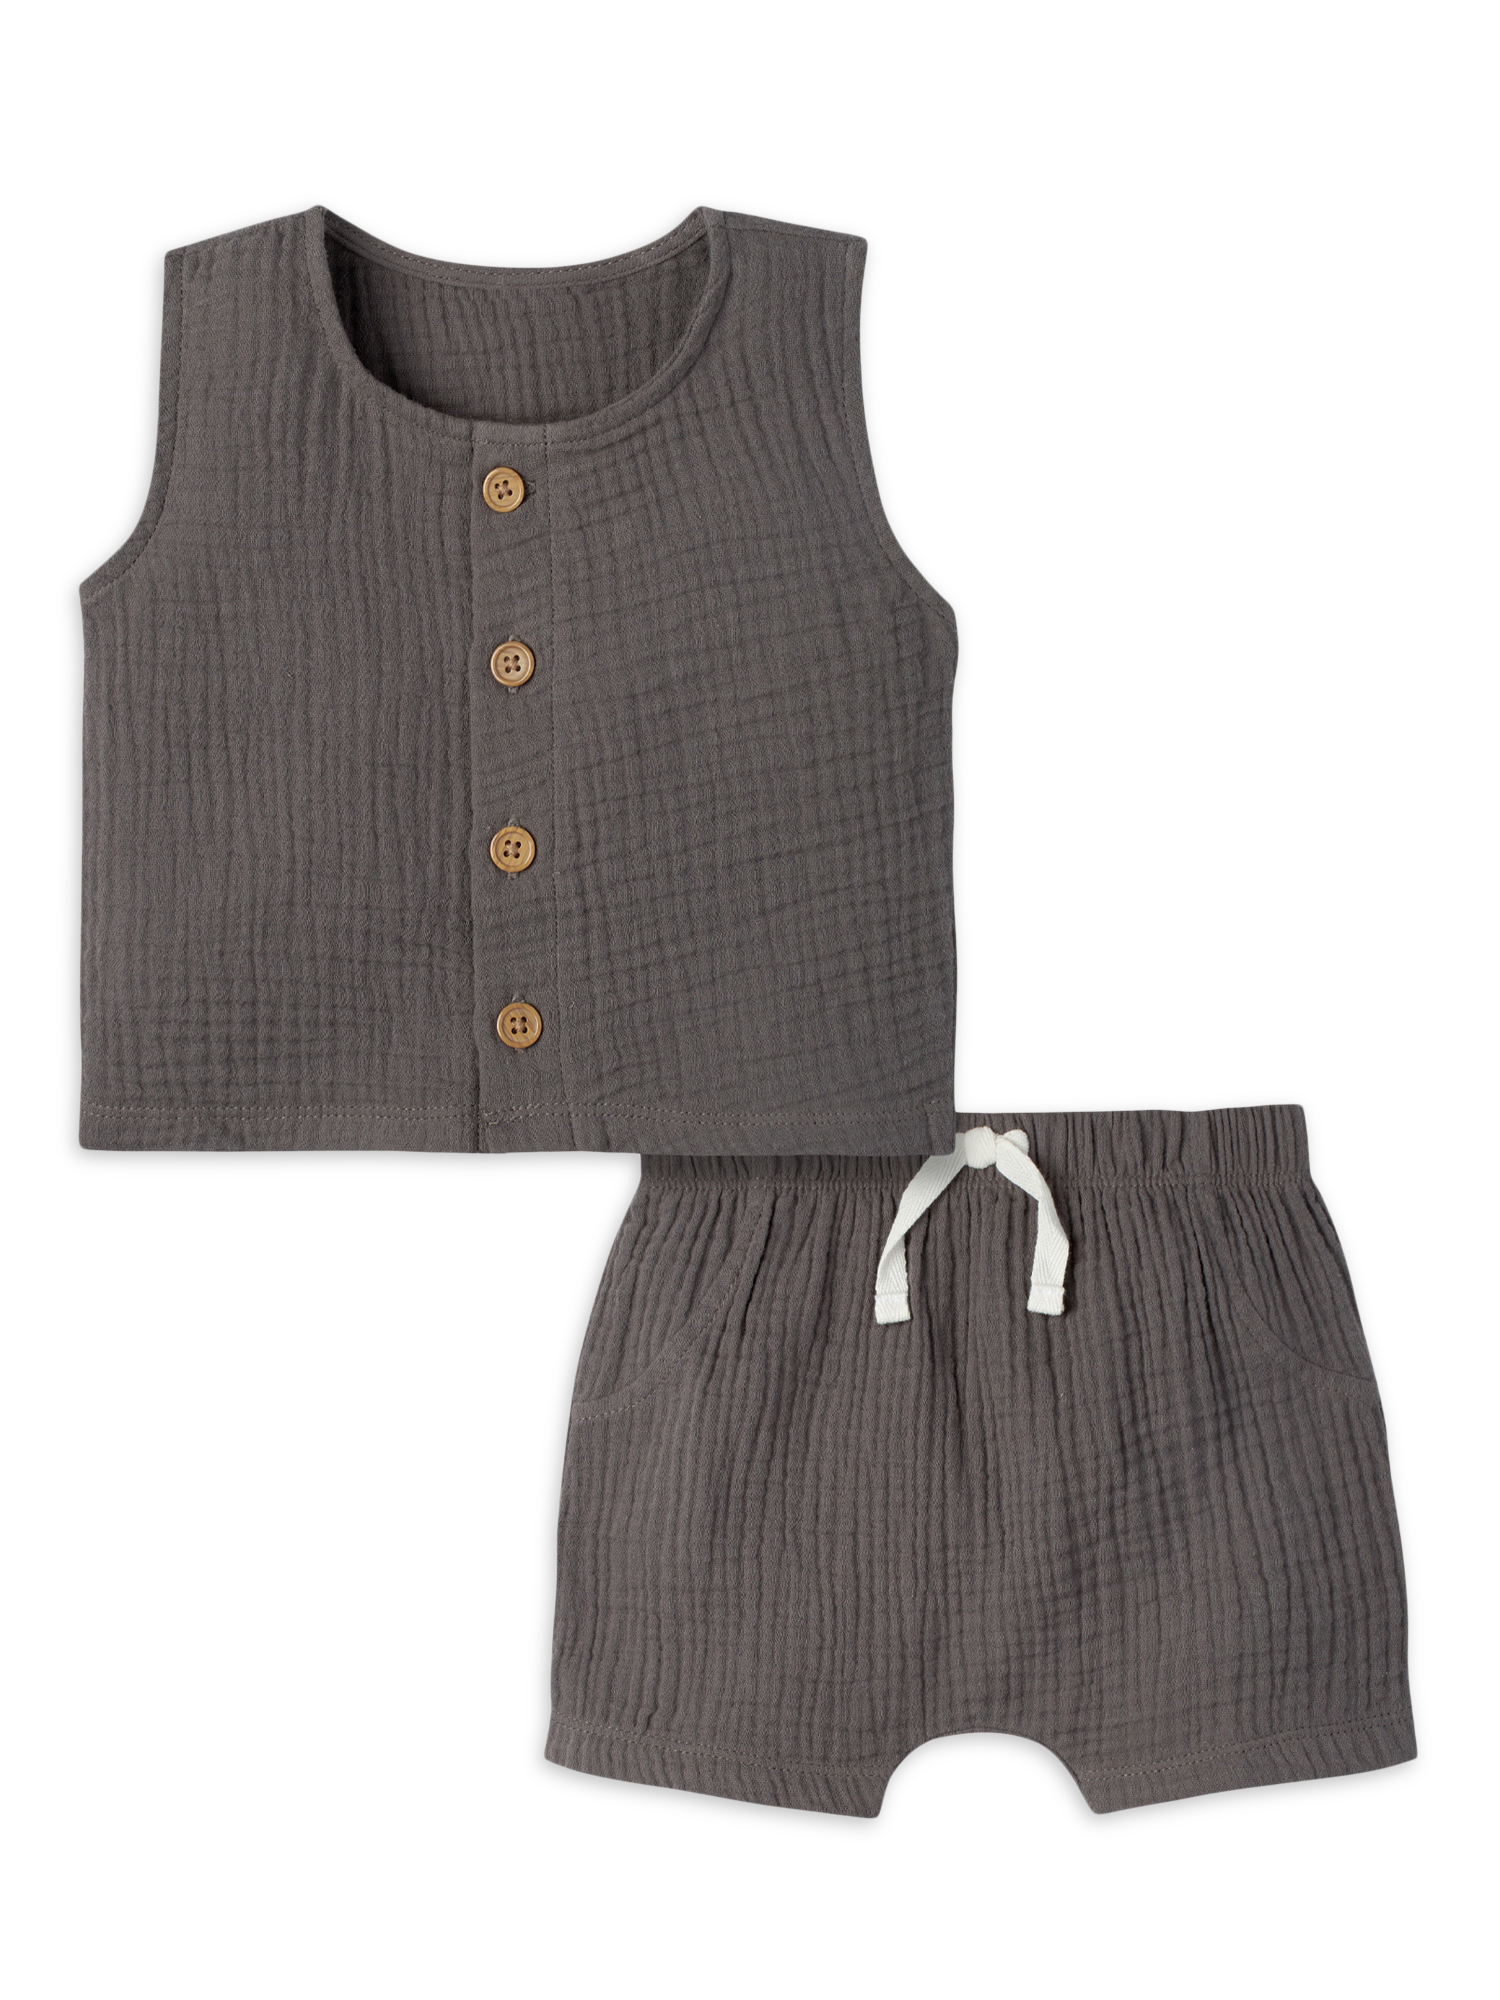 Modern Moments by Gerber Baby Boy Top and Short Outfit Set, 2 Piece, Sizes 0/3 Months-24 Months - image 3 of 11